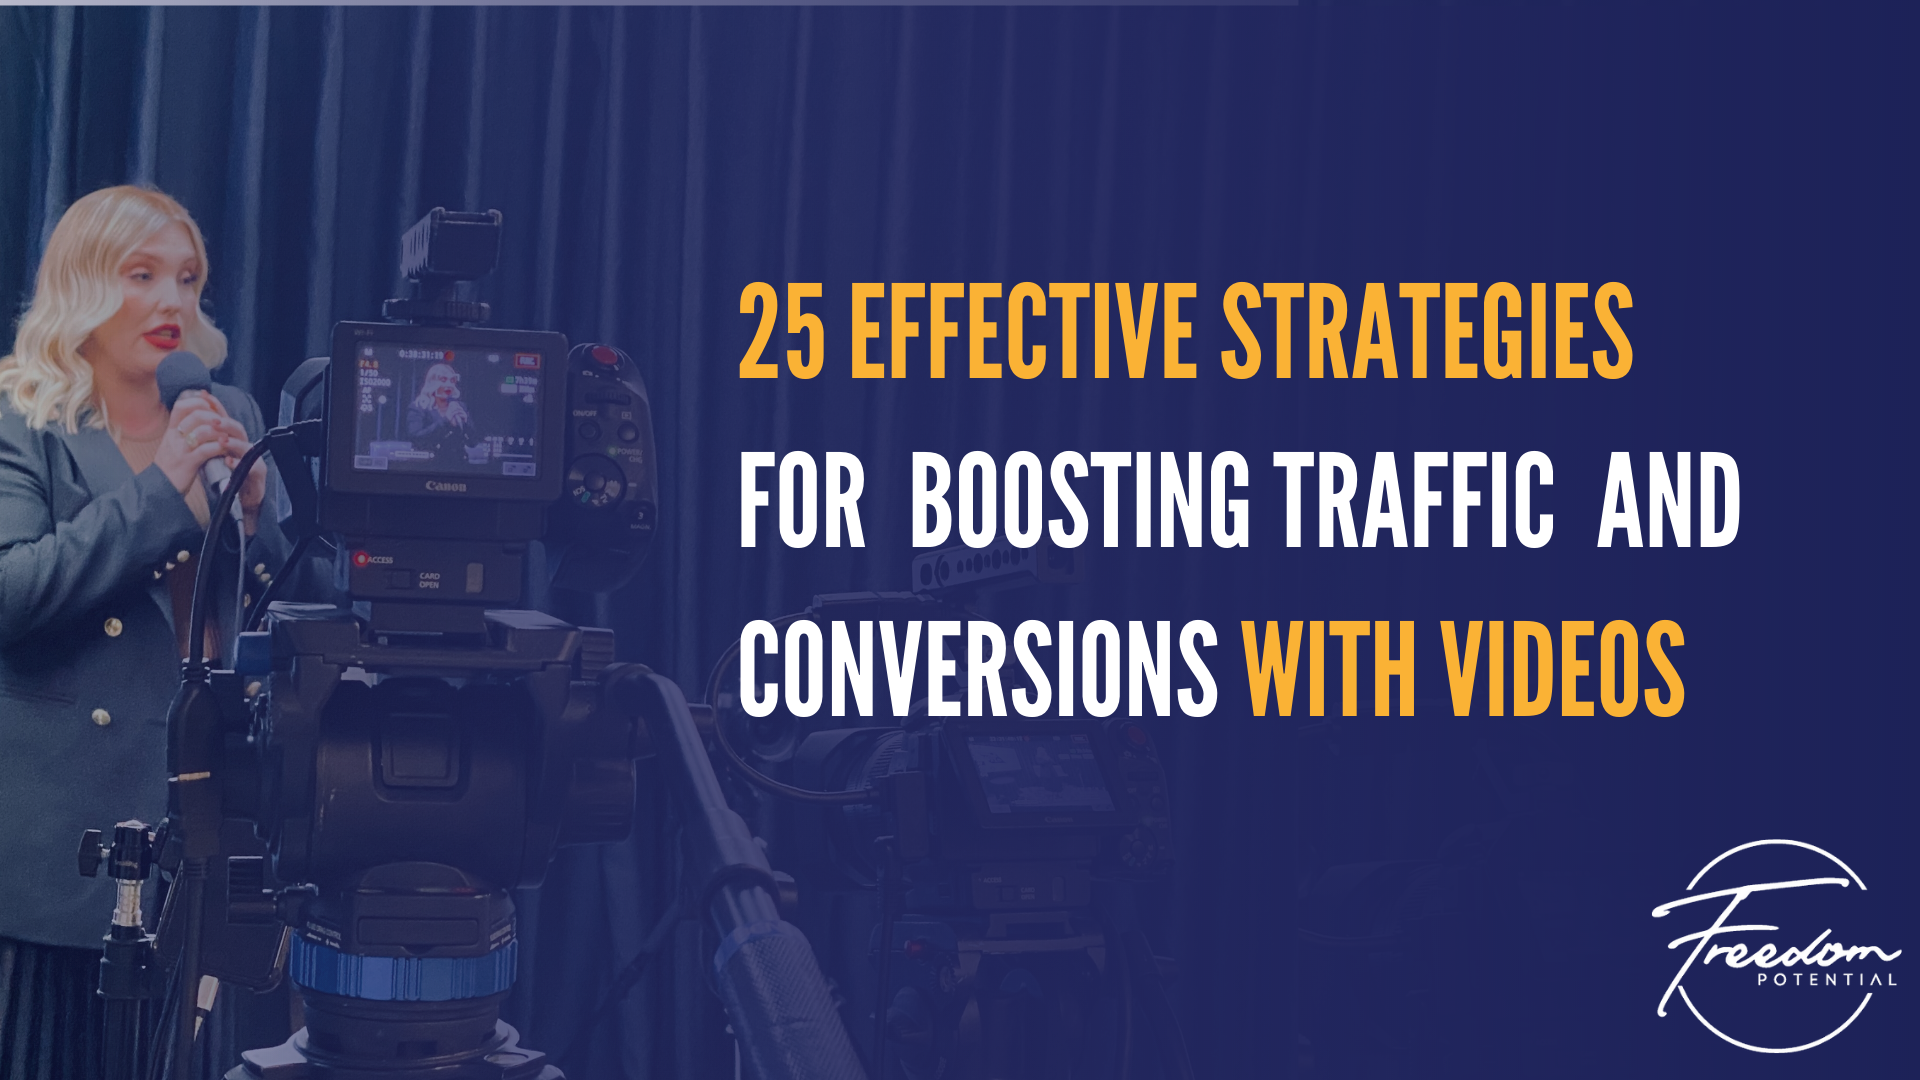 You are currently viewing 25 Effective Strategies for Boosting Traffic and Conversions with Videos